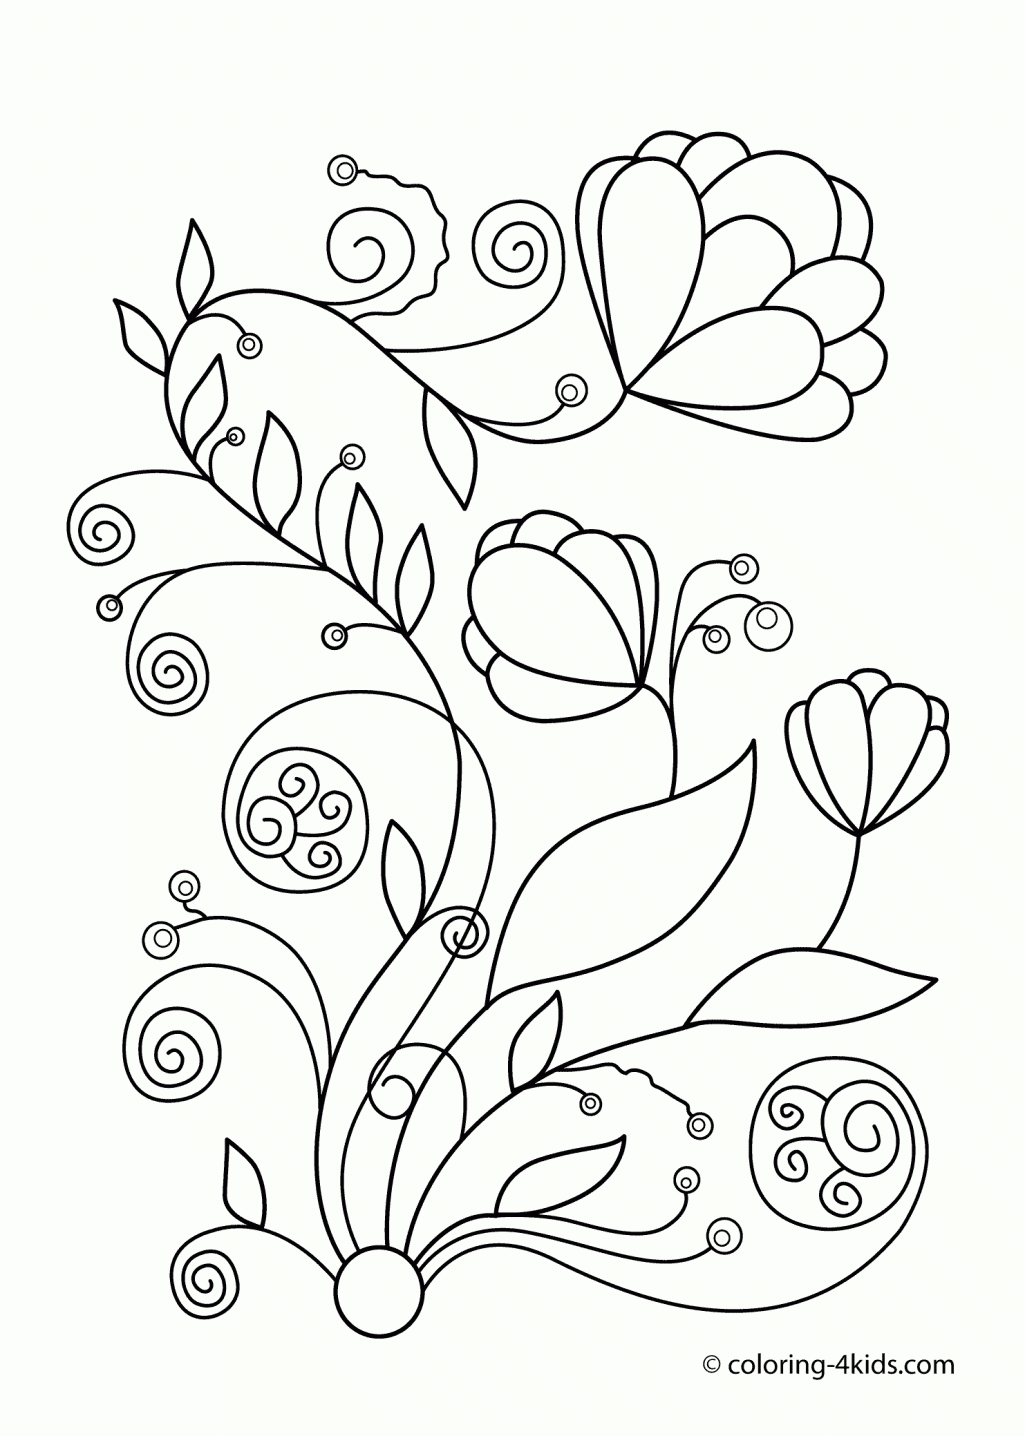 Flowers Coloring Pages For Adults Wwwazembrace Coloring Pages ...